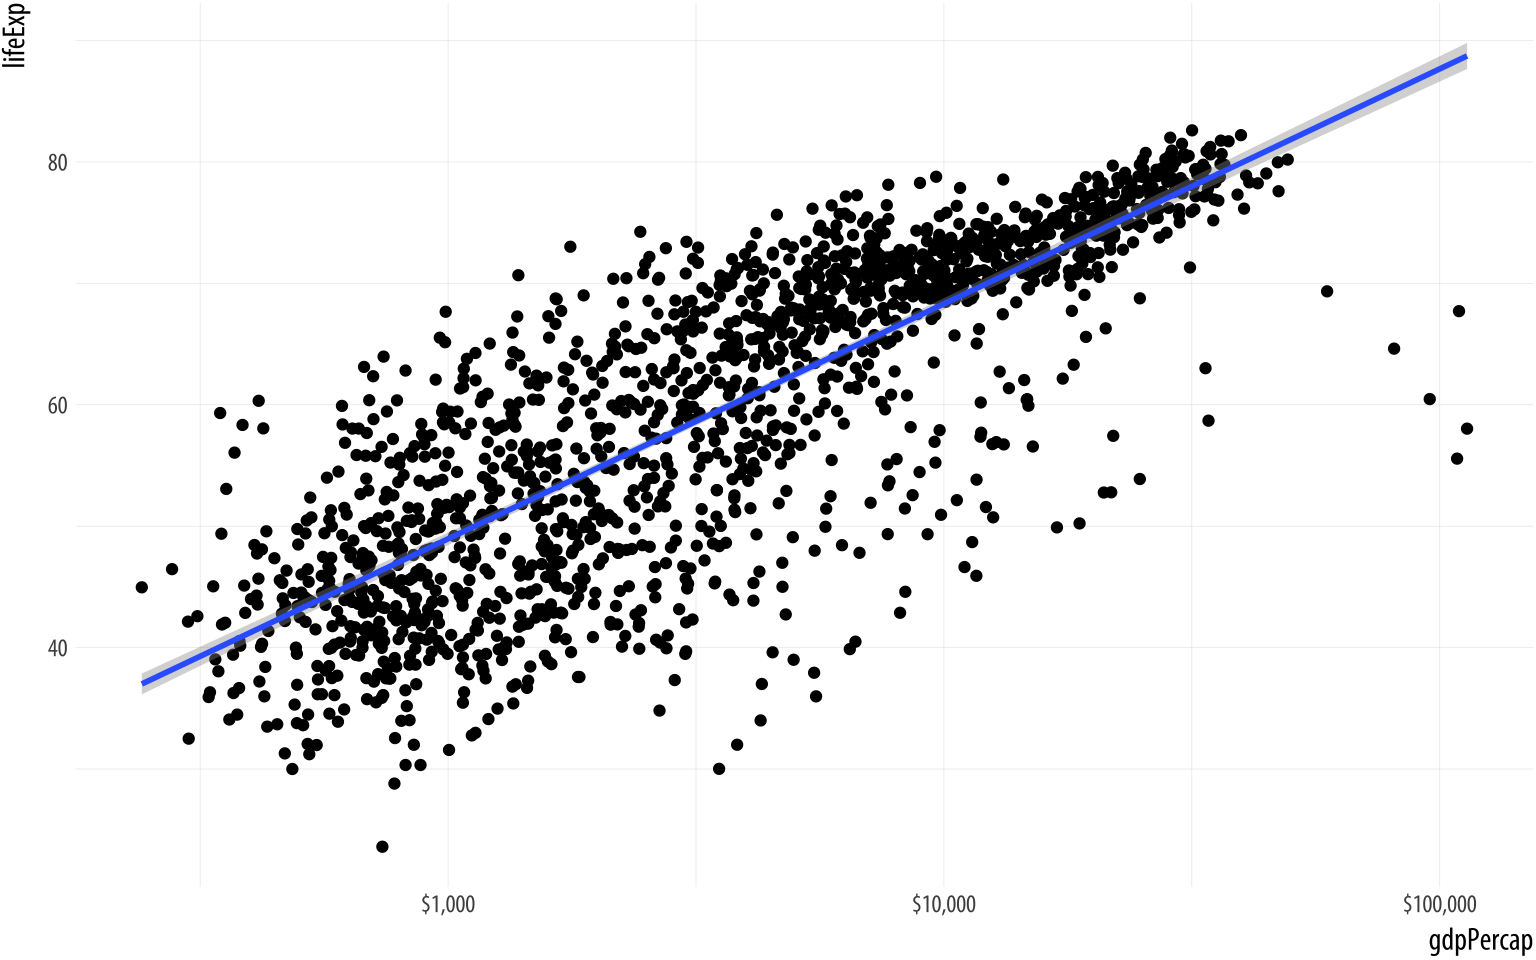 Life Expectancy vs GDP scatterplot, with a GAM smoother and a log scale on the x-axis, with better labels on the tick marks.